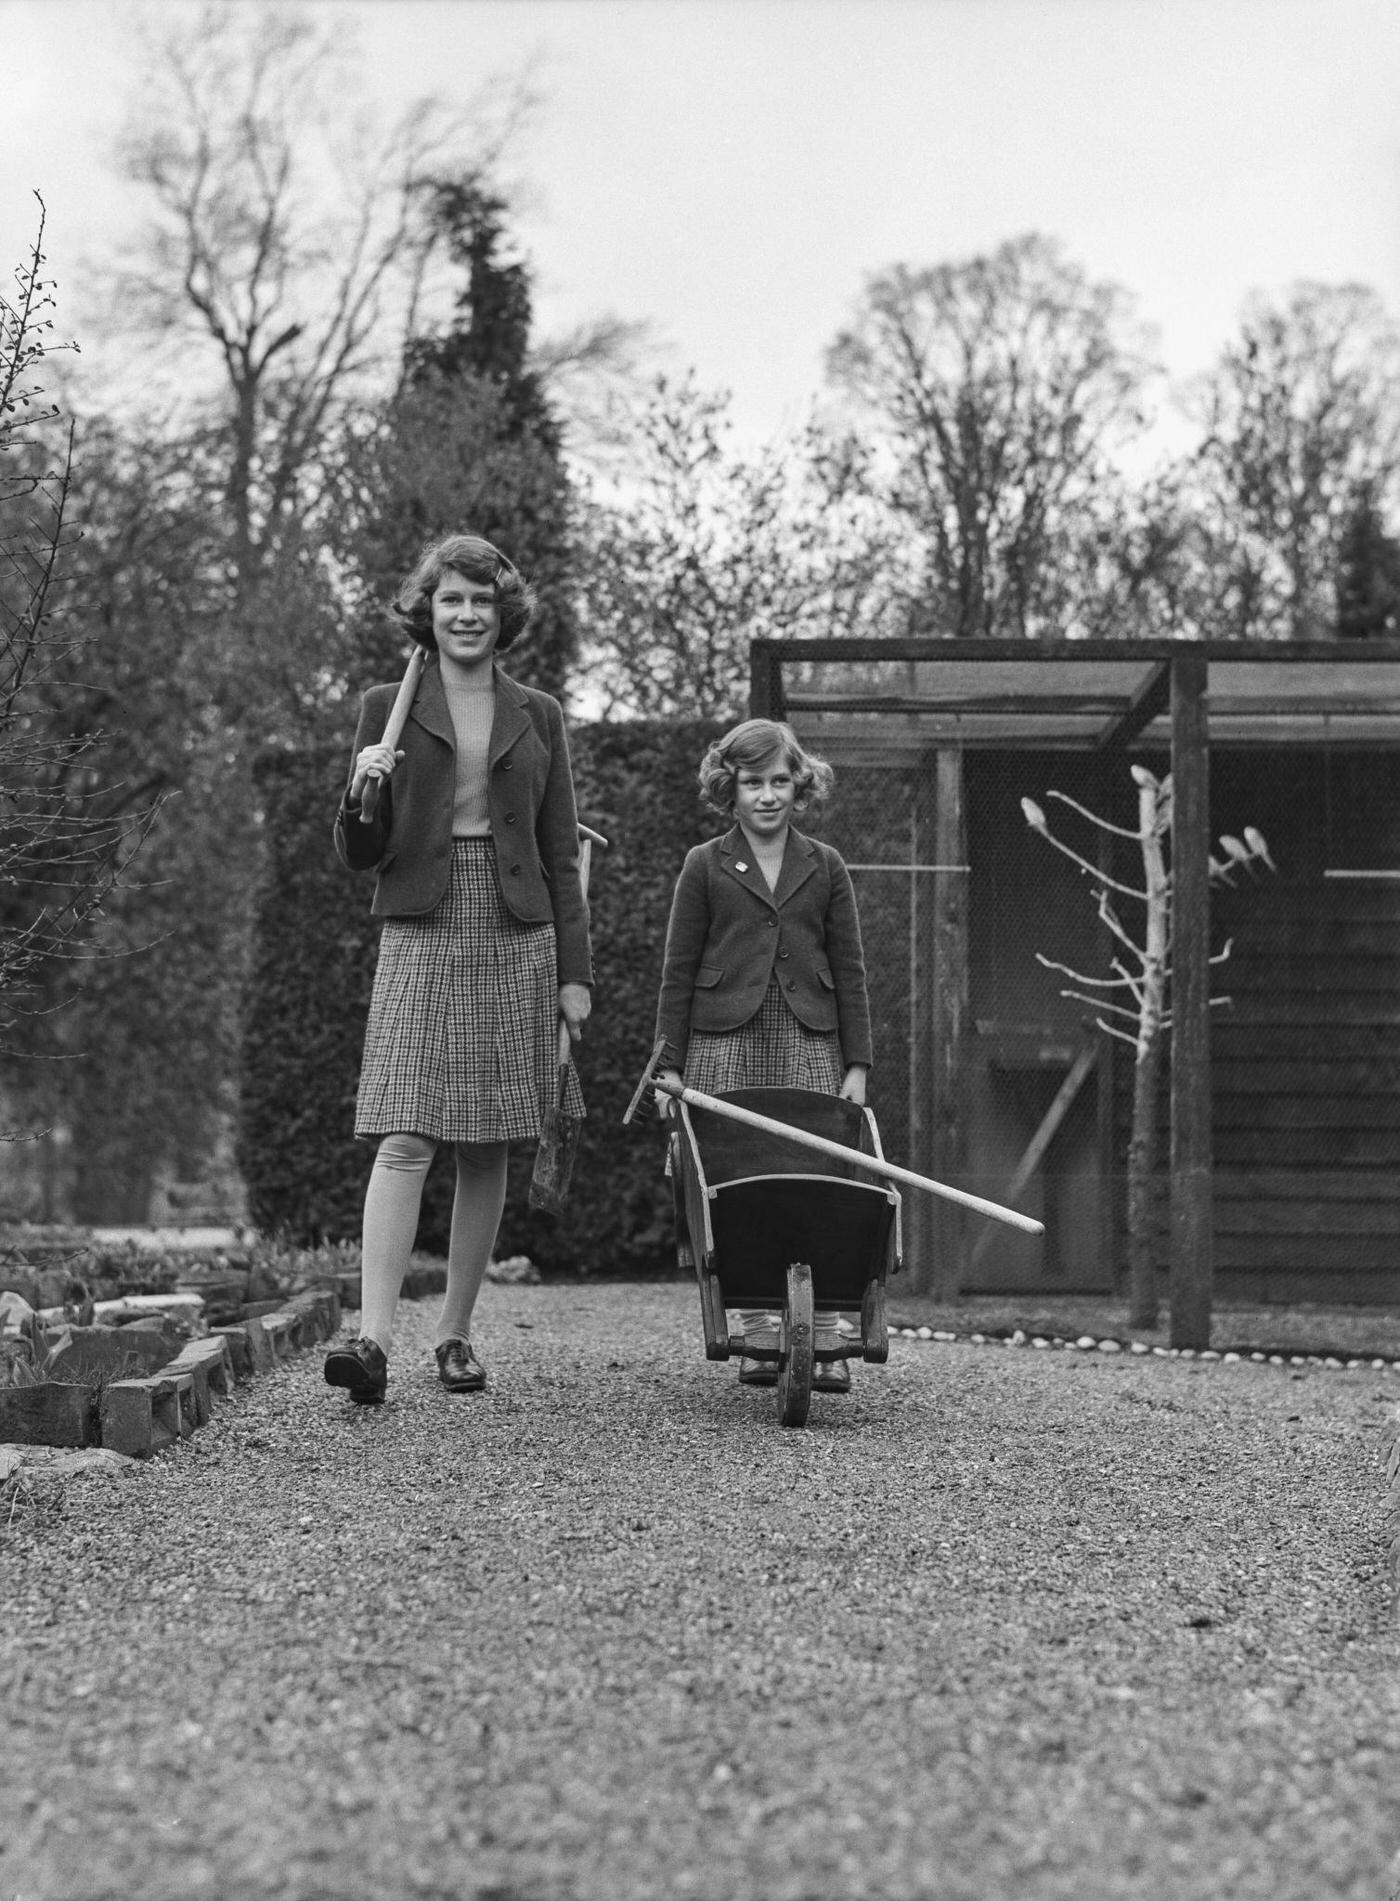 The Royal Princesses Elizabeth and Margaret in their garden at the Royal Lodge in Windsor Great Park, UK, April 1940.